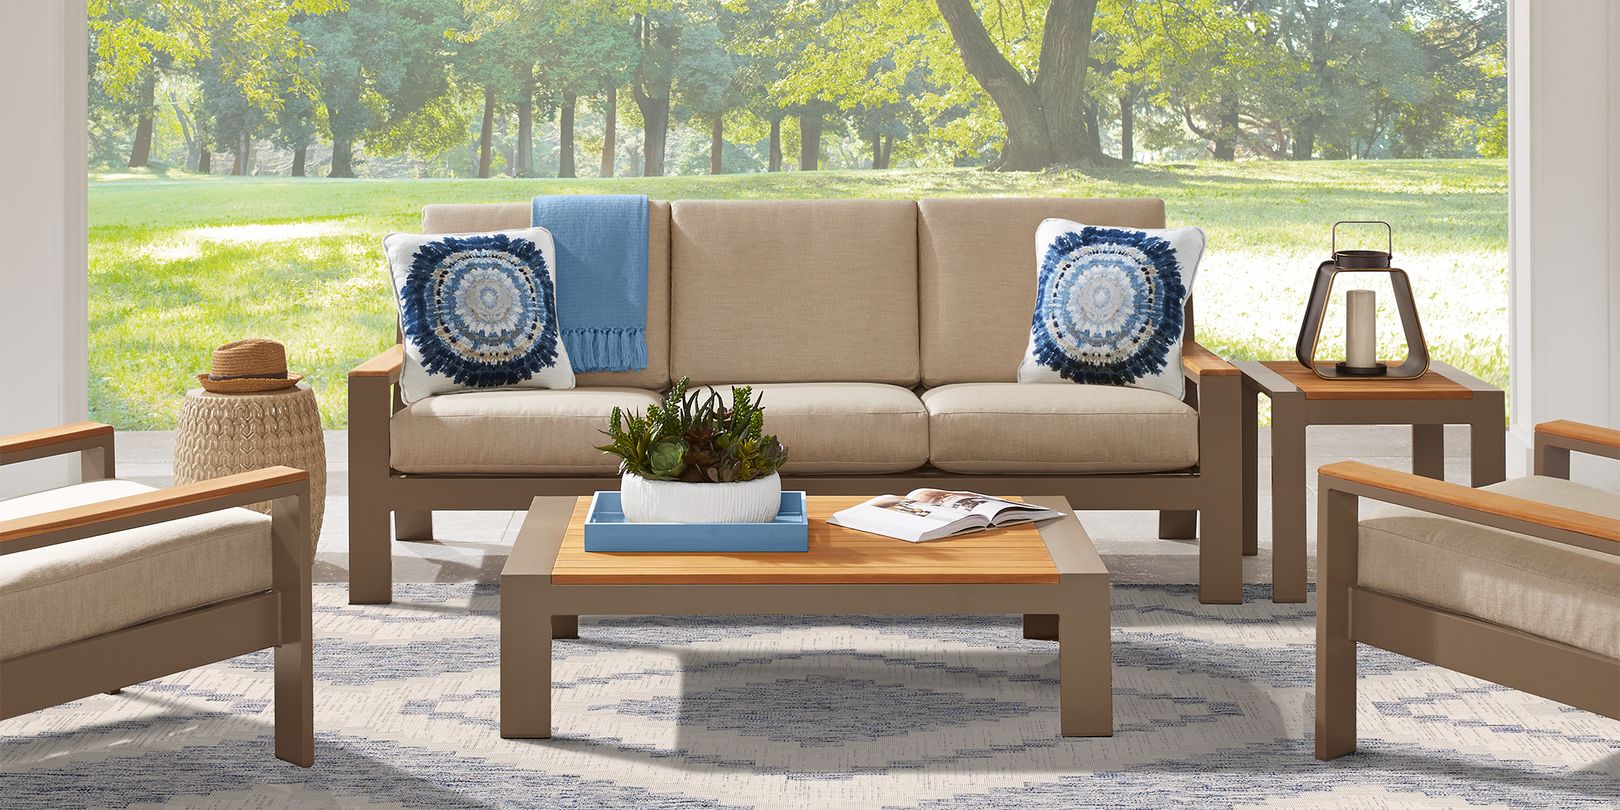 Photo of taupe patio seating set with cushions and tables